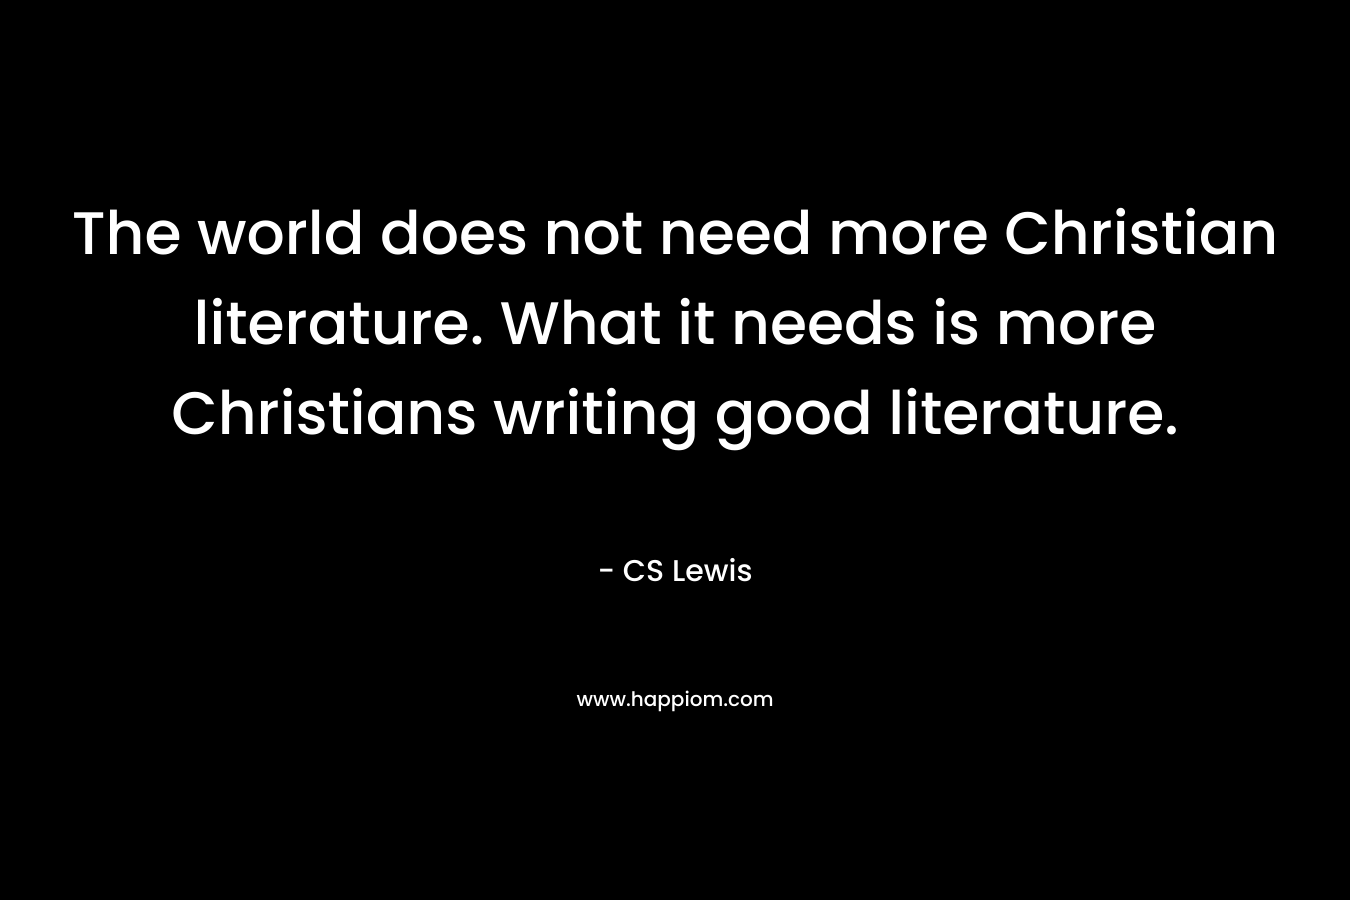 The world does not need more Christian literature. What it needs is more Christians writing good literature. – CS Lewis